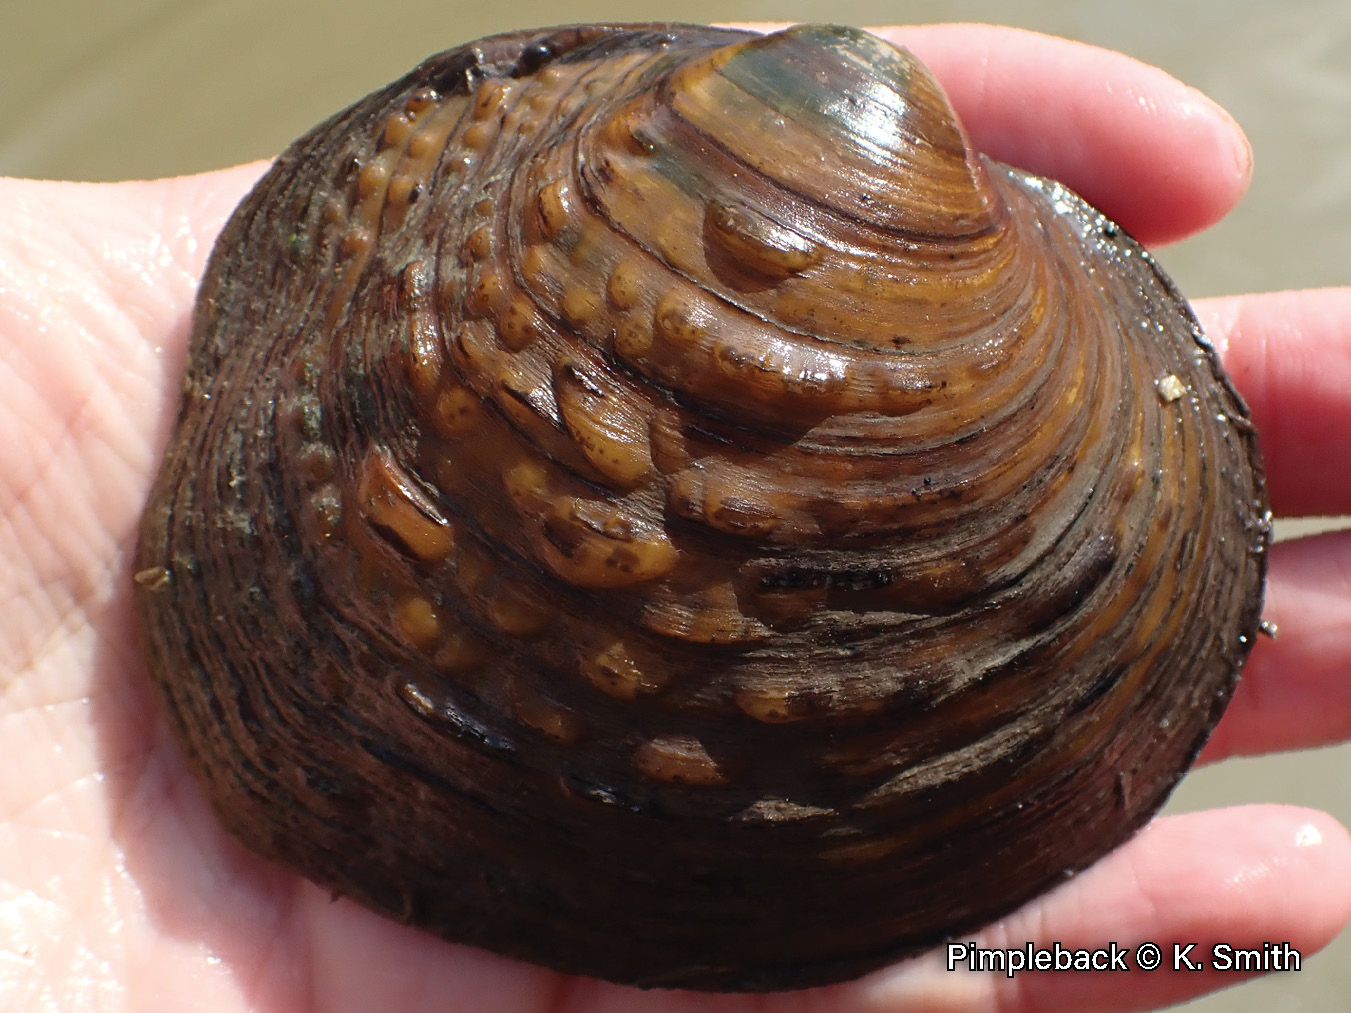 Picture of a Pimpleback mussel in a hand, a brown, medium-sized mussel that is irregularly covered in bumps with a broad green ray on its beak